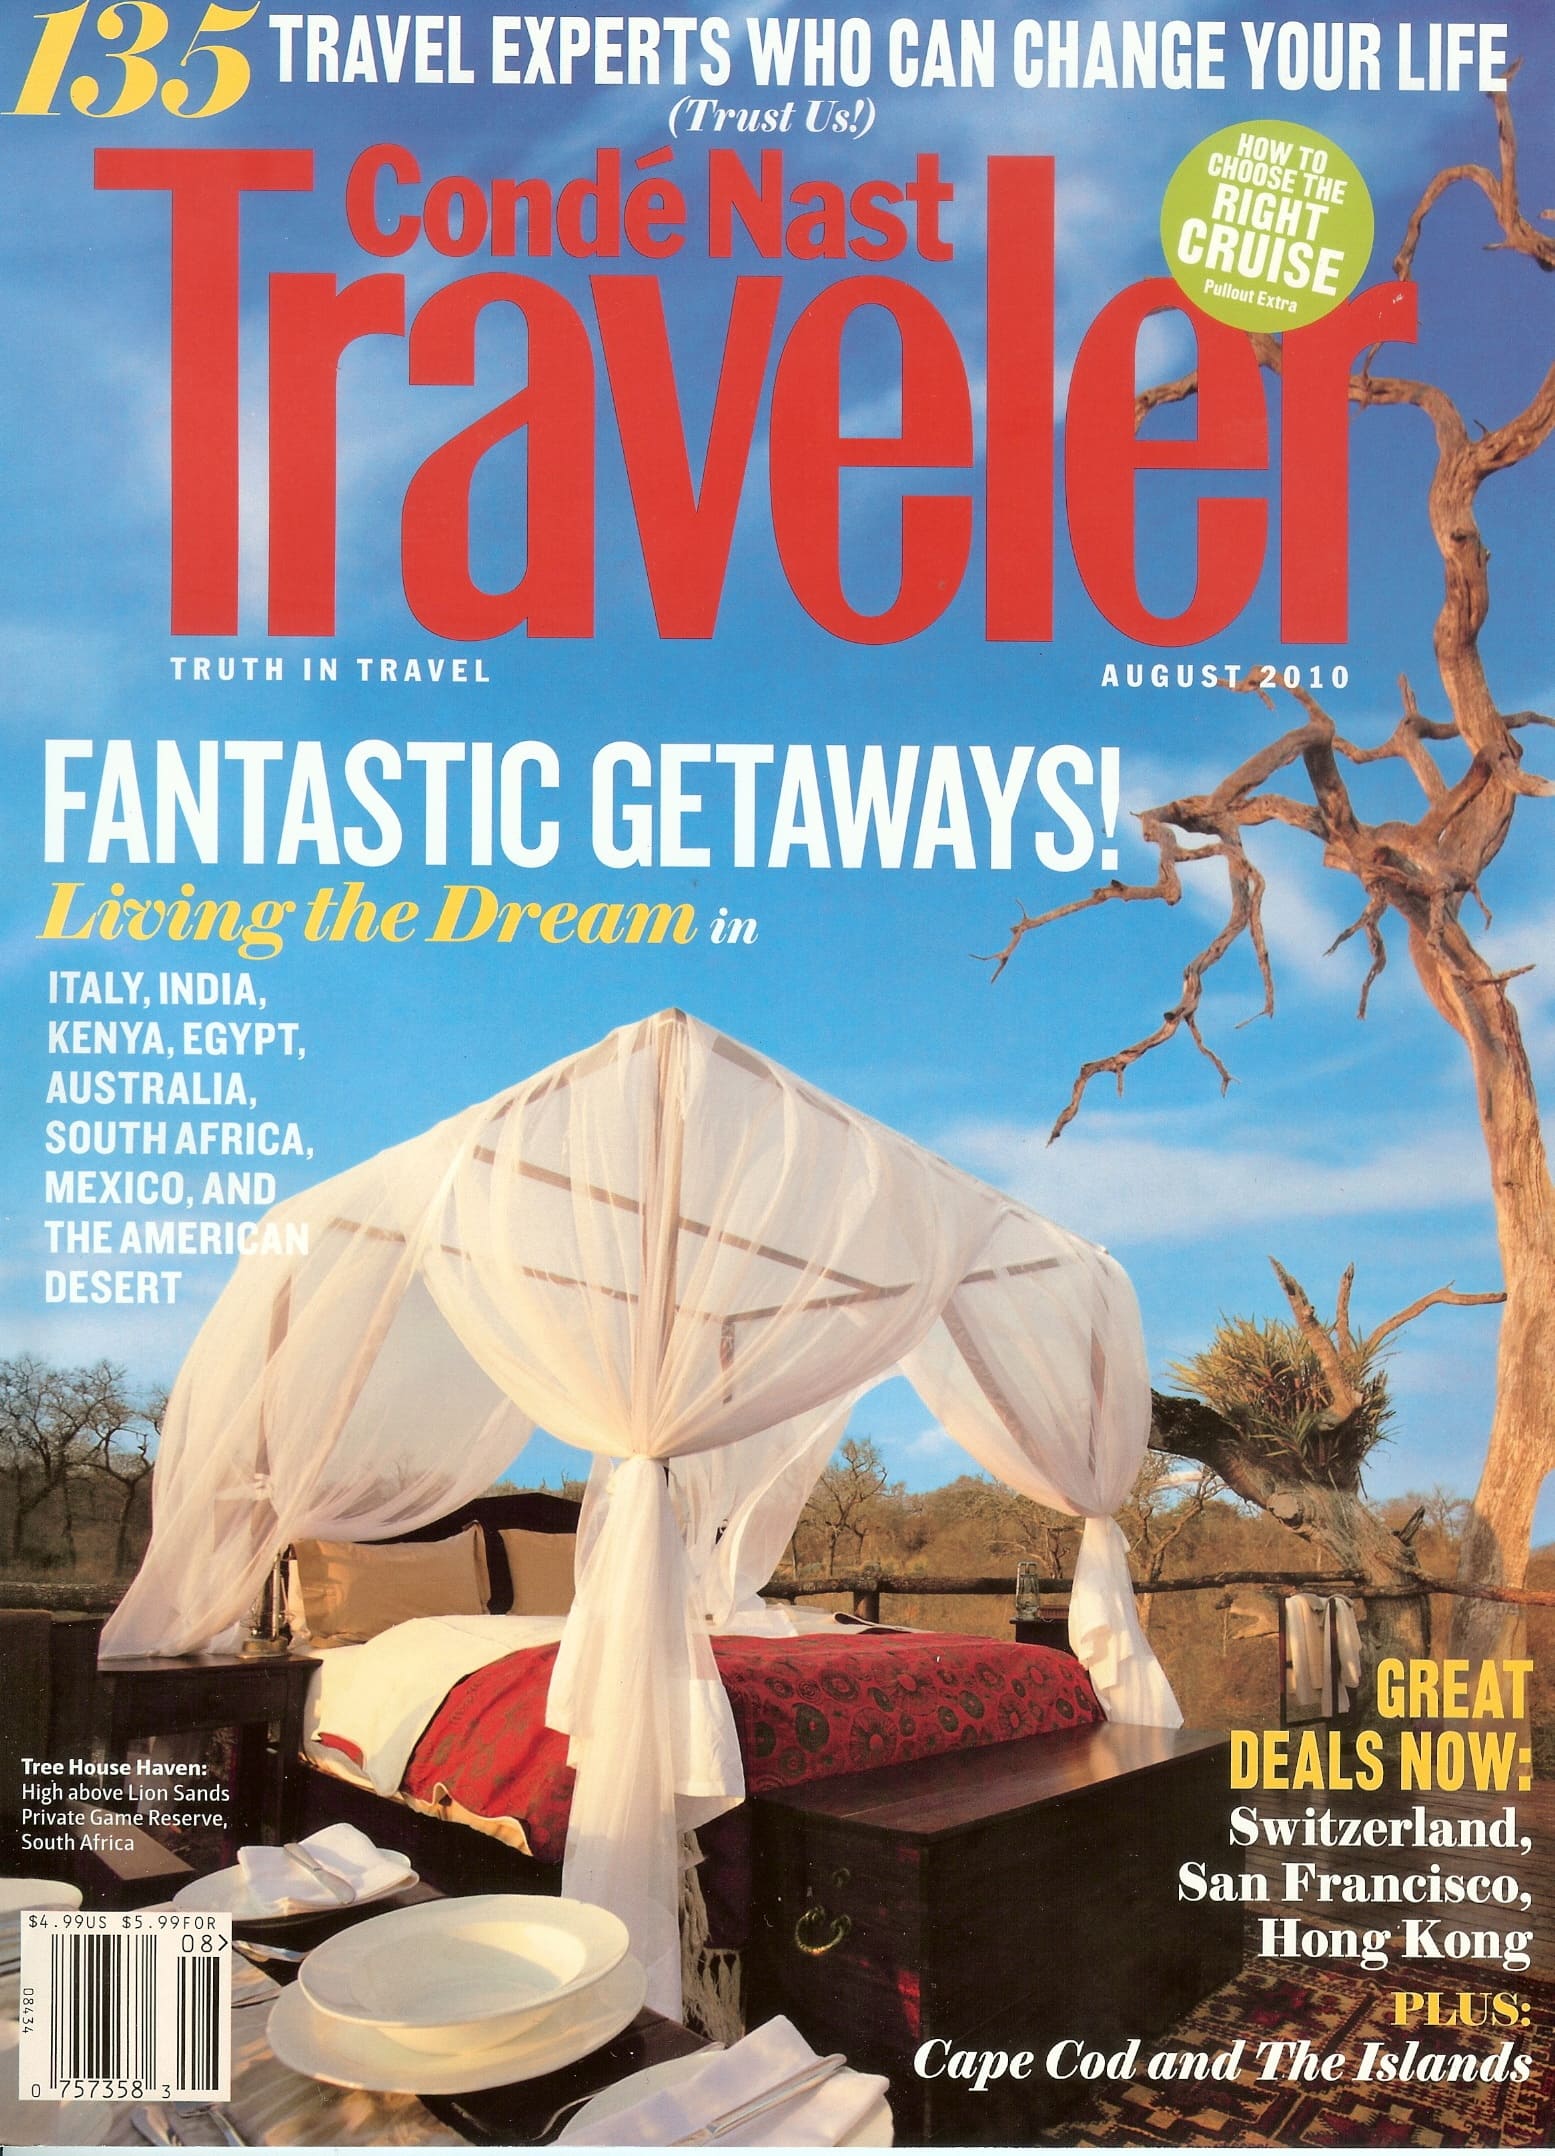 Conde Nast Traveler World's Tops Specialists Cover